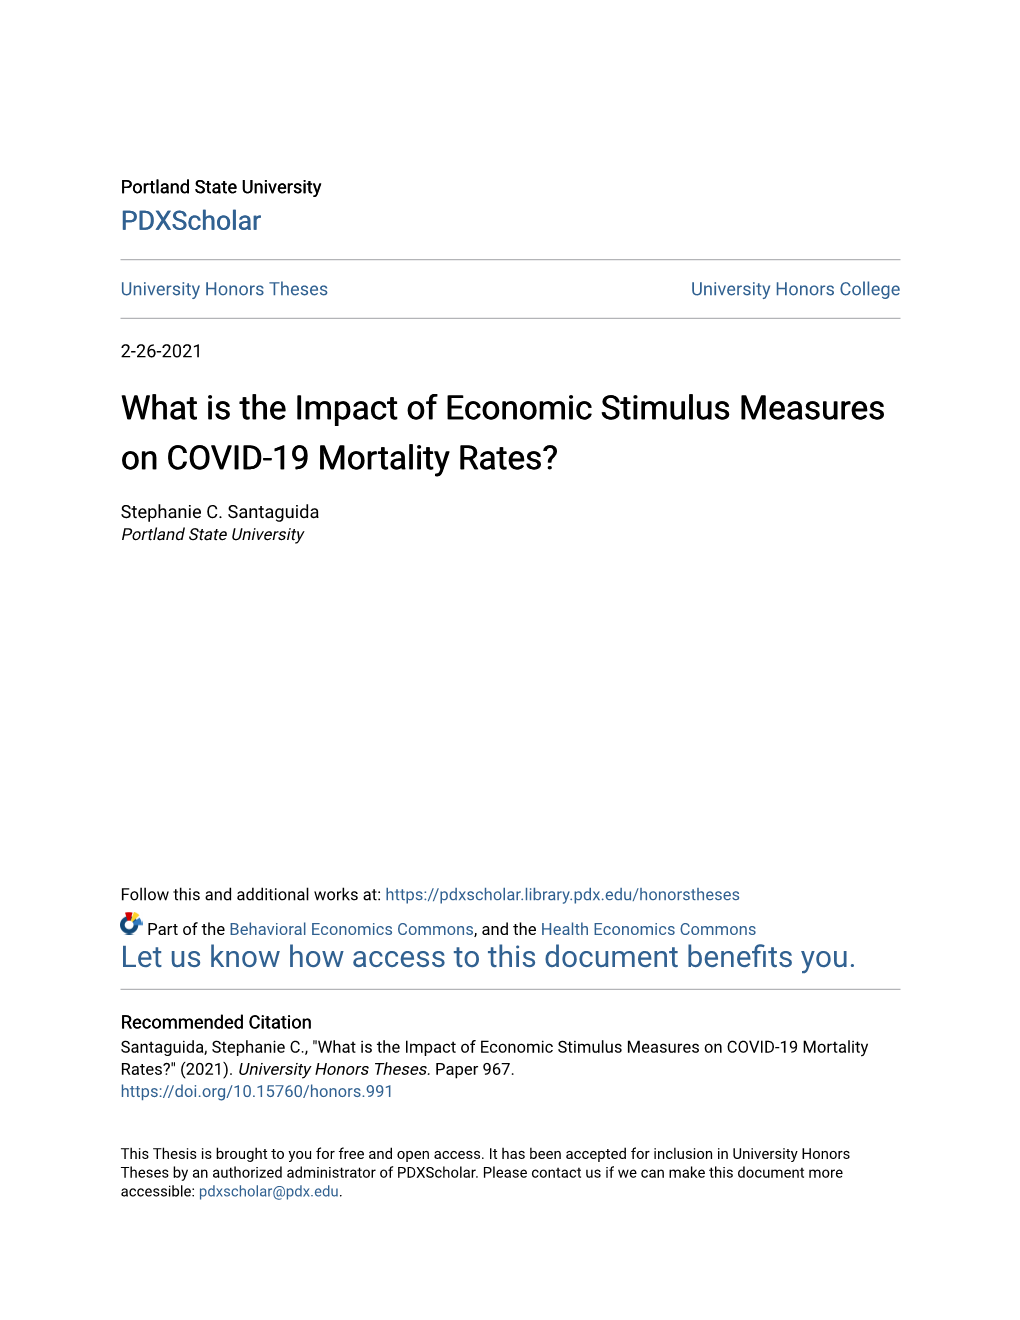 What Is the Impact of Economic Stimulus Measures on COVID-19 Mortality Rates?